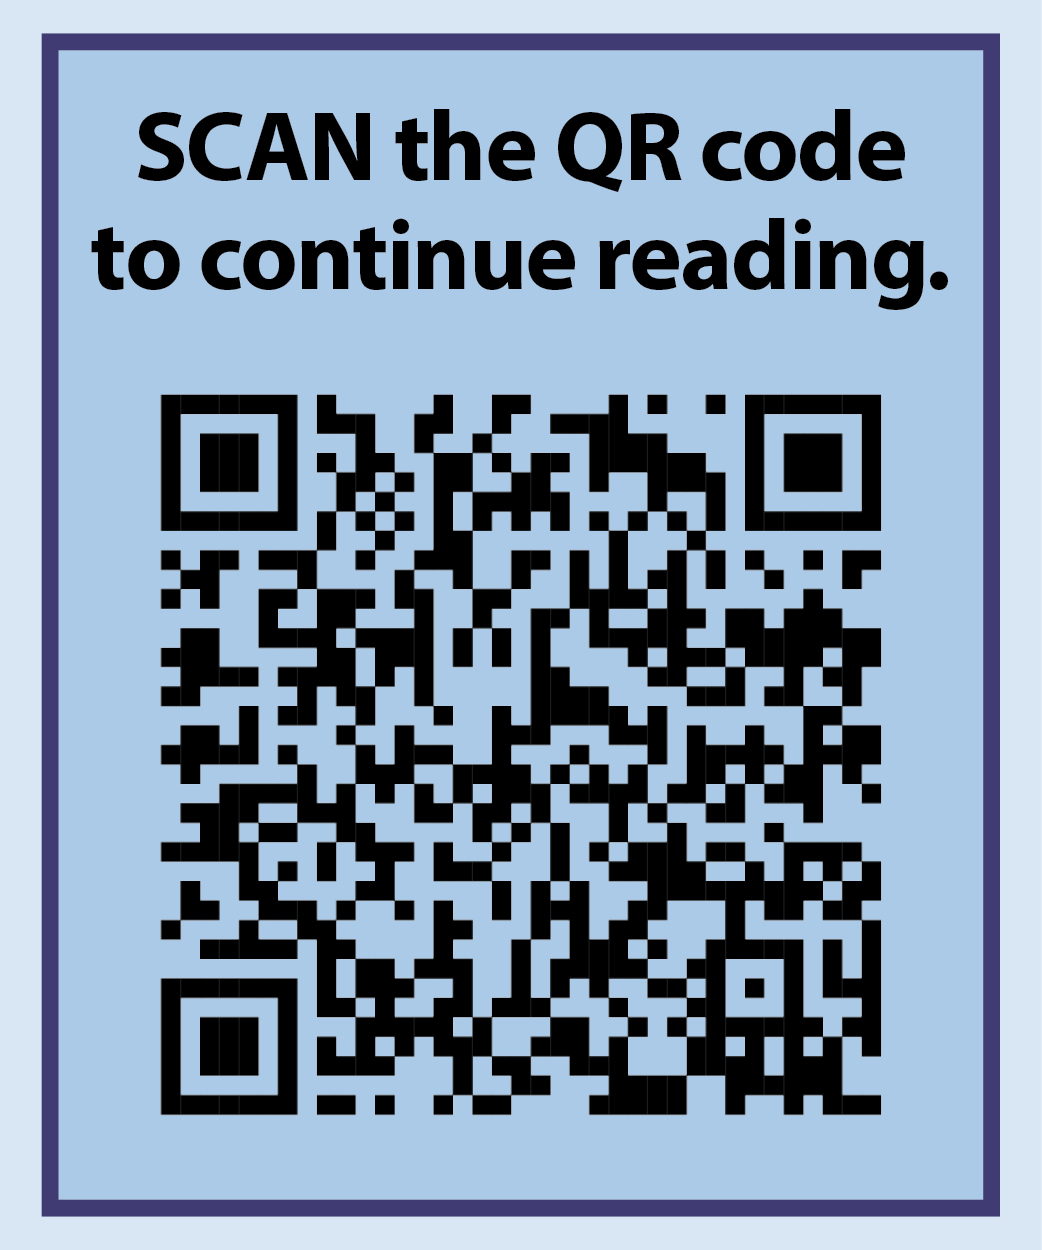 Scan the QR code